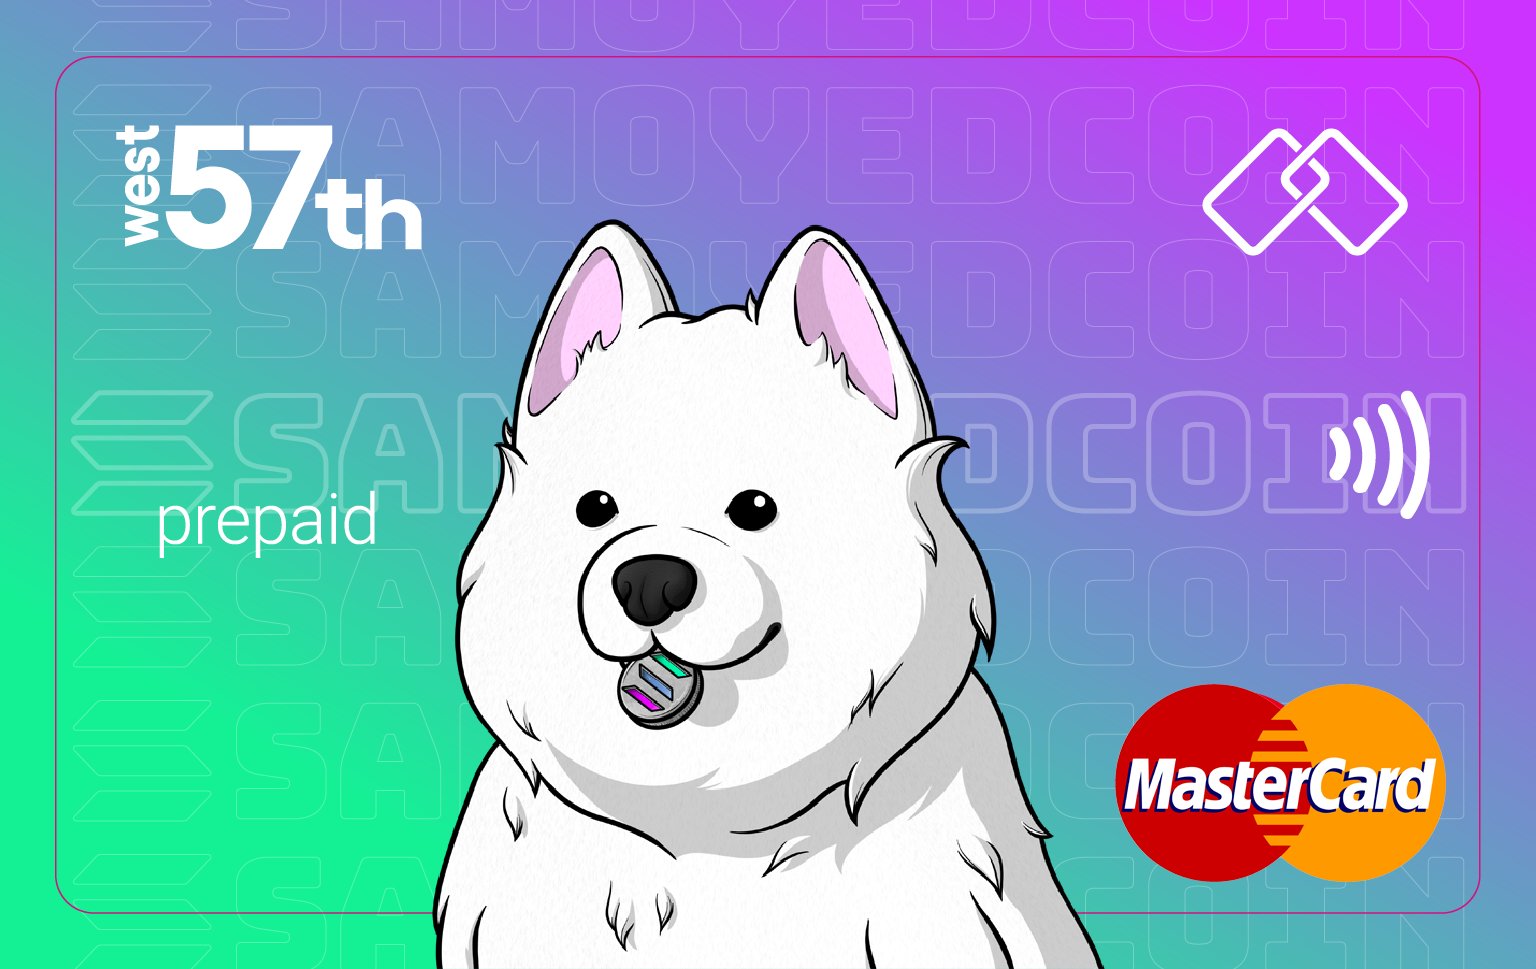 Samoyedcoin (SAMO) on X: "🚨 MAJOR ANNOUNCEMENT 🚨 While others have been hyping, we've been swiping! 💳 We're announcing today the FIRST #Solana Coin & Memecoin @Mastercard alongside our fam @West57th_! SOON